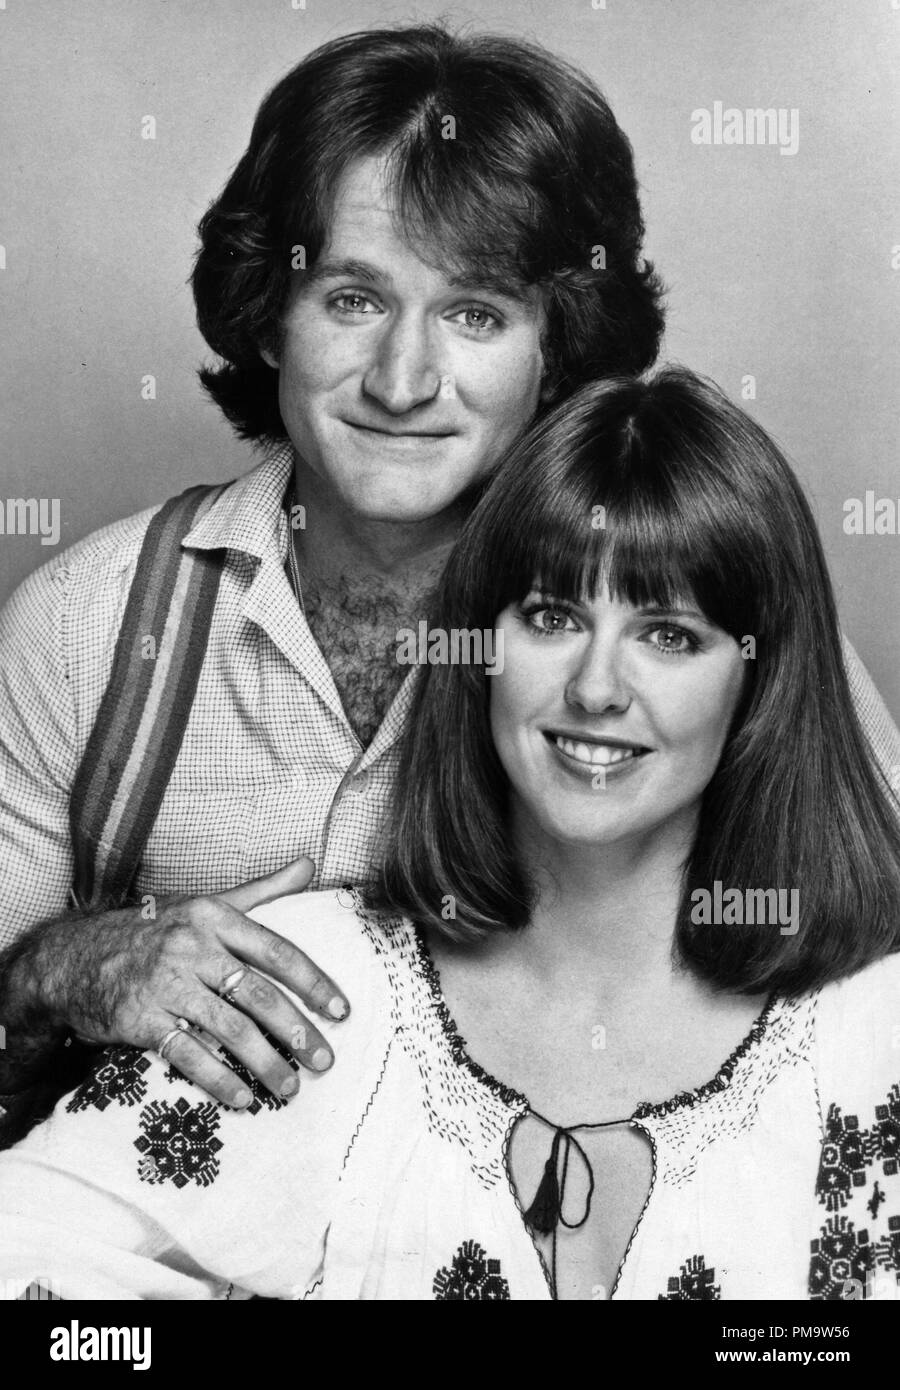 Studio Publicity Still from 'Mork & Mindy' Robin Williams, Pam Dawber 1978  All Rights Reserved   File Reference # 31720128THA  For Editorial Use Only Stock Photo